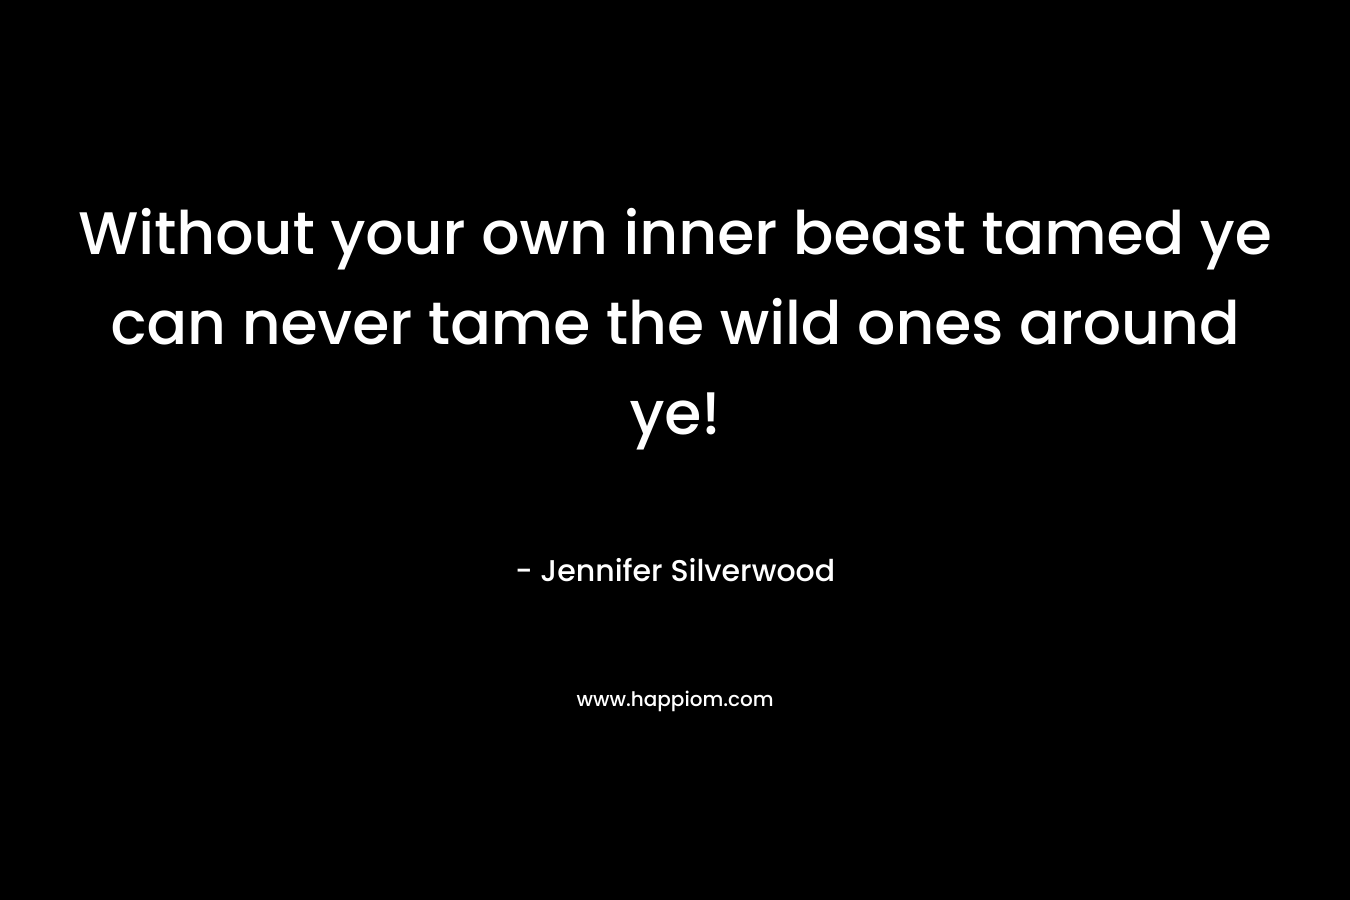 Without your own inner beast tamed ye can never tame the wild ones around ye!